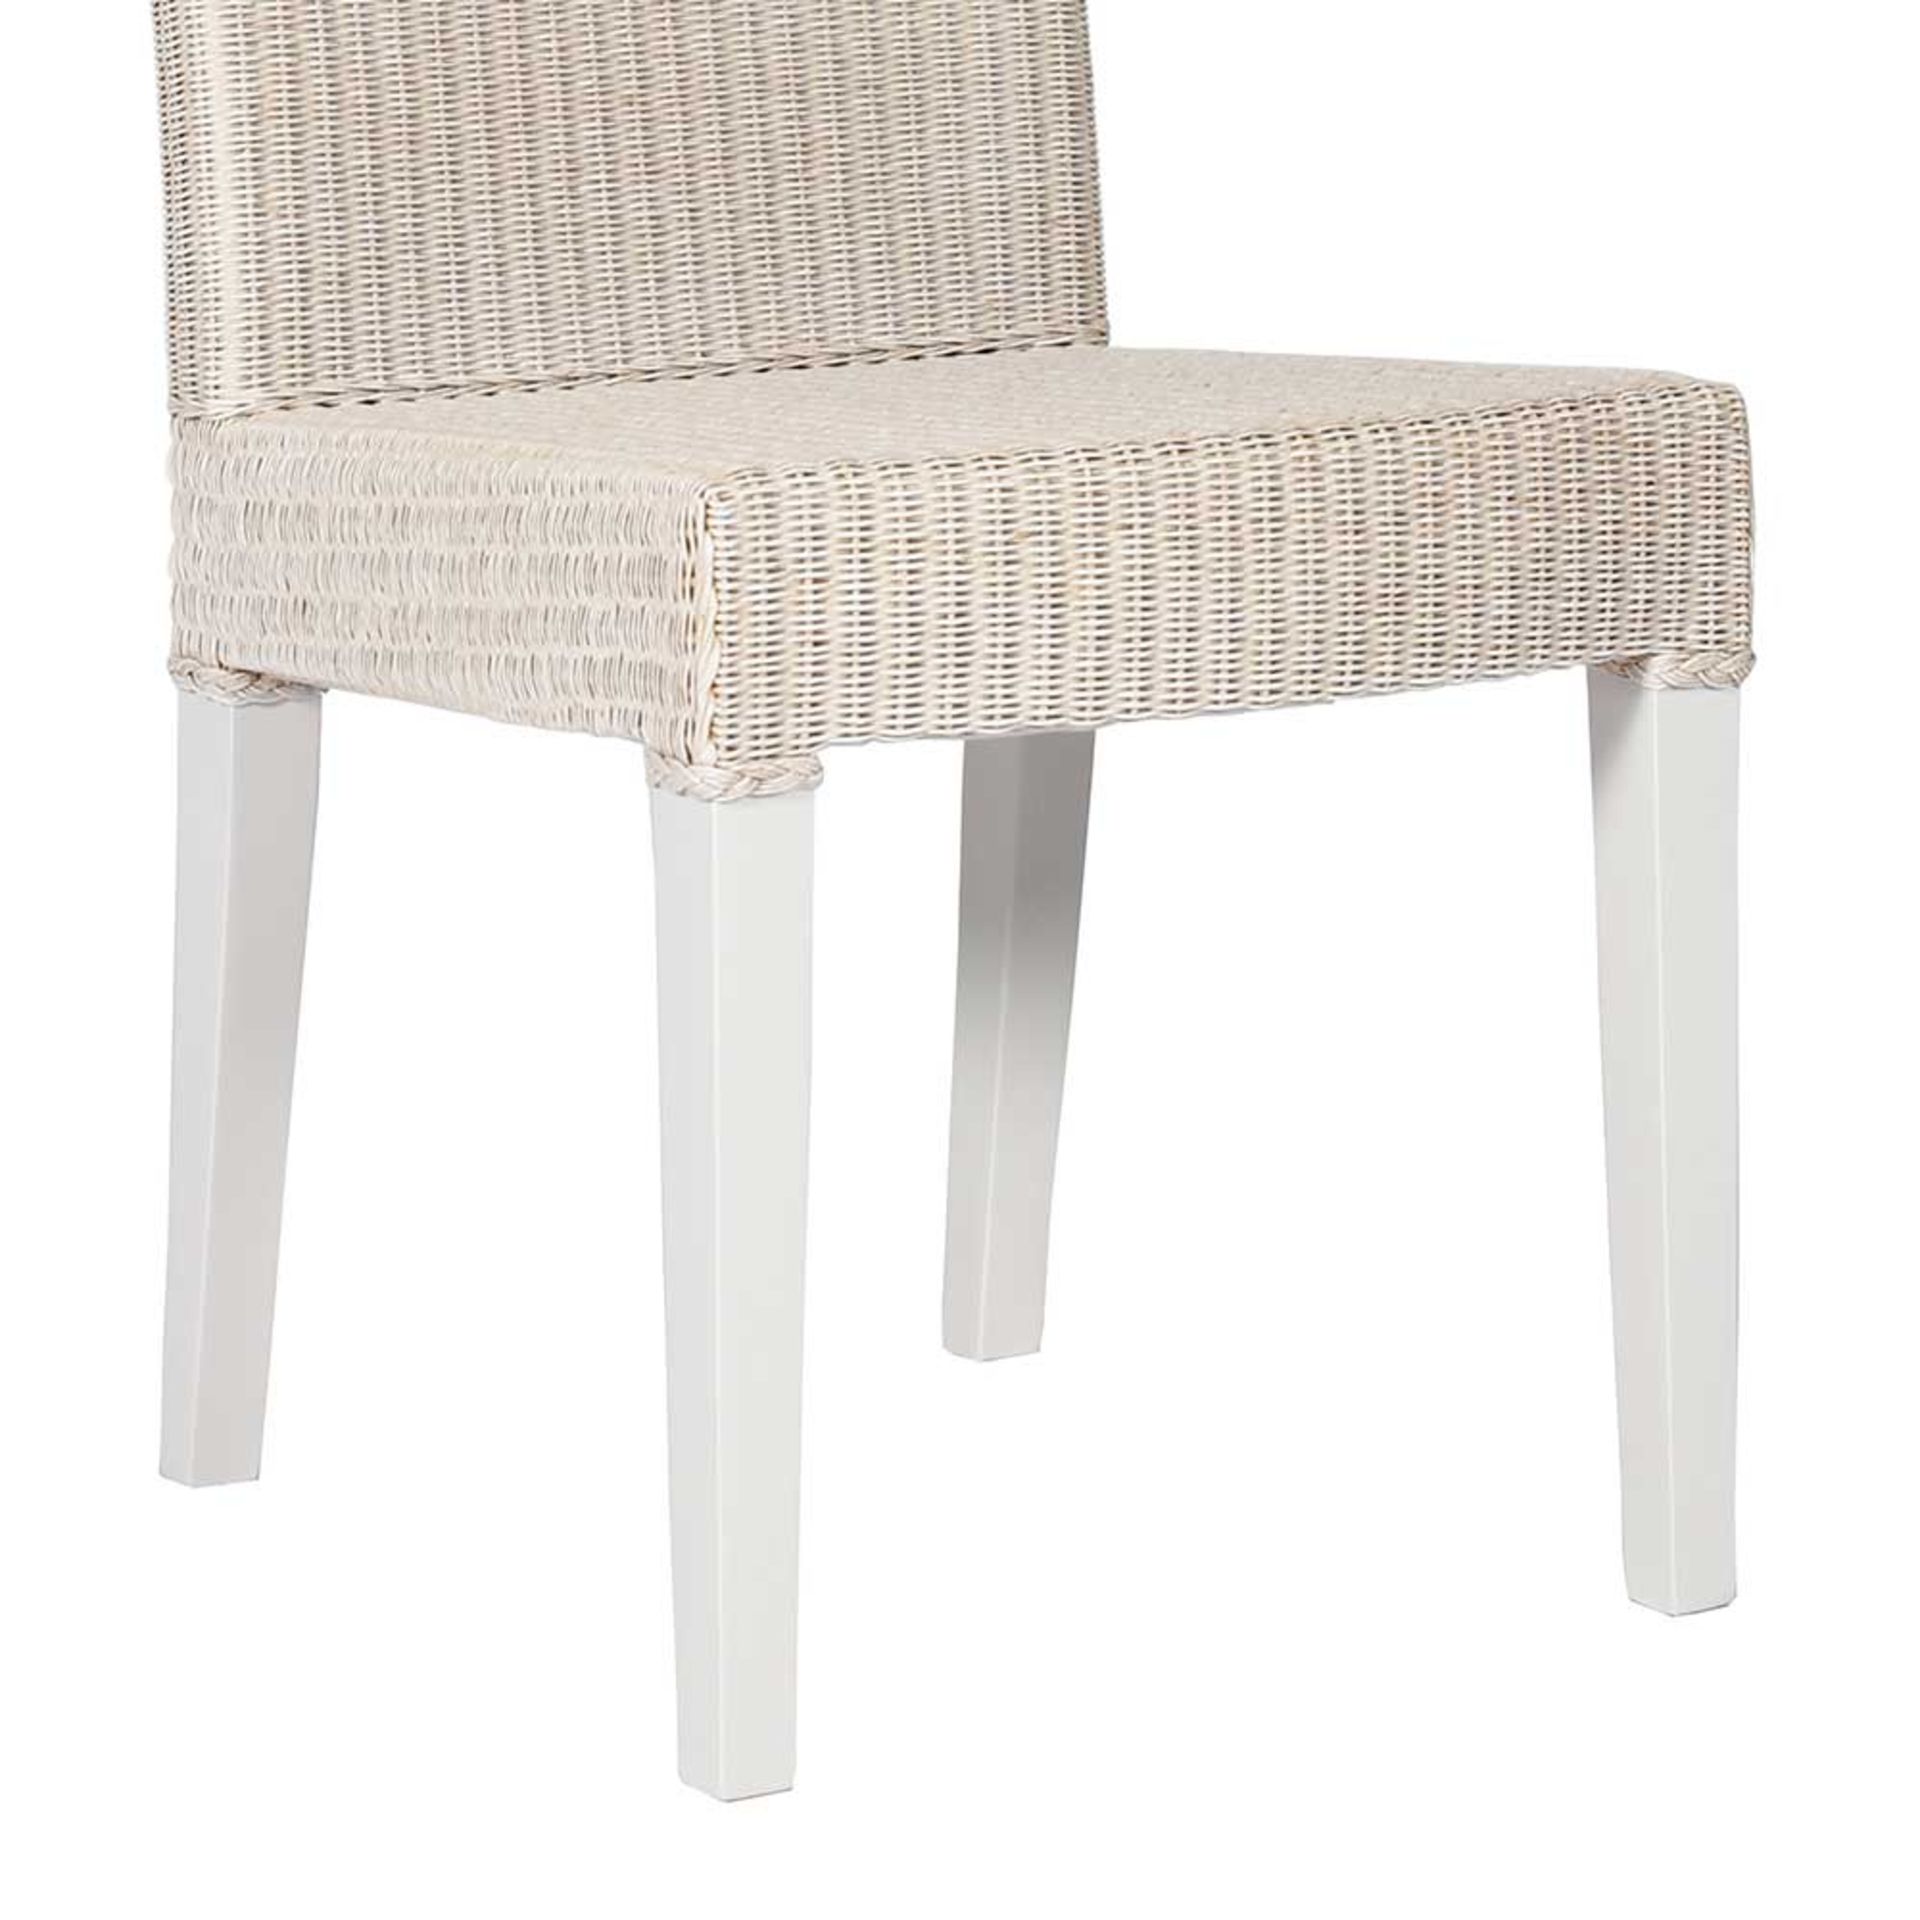 4 x Lina Two Tone Lloyd Loom Woven Dining Chairs - Contemporary Dining Chair Set - RRP £792! - Image 4 of 7